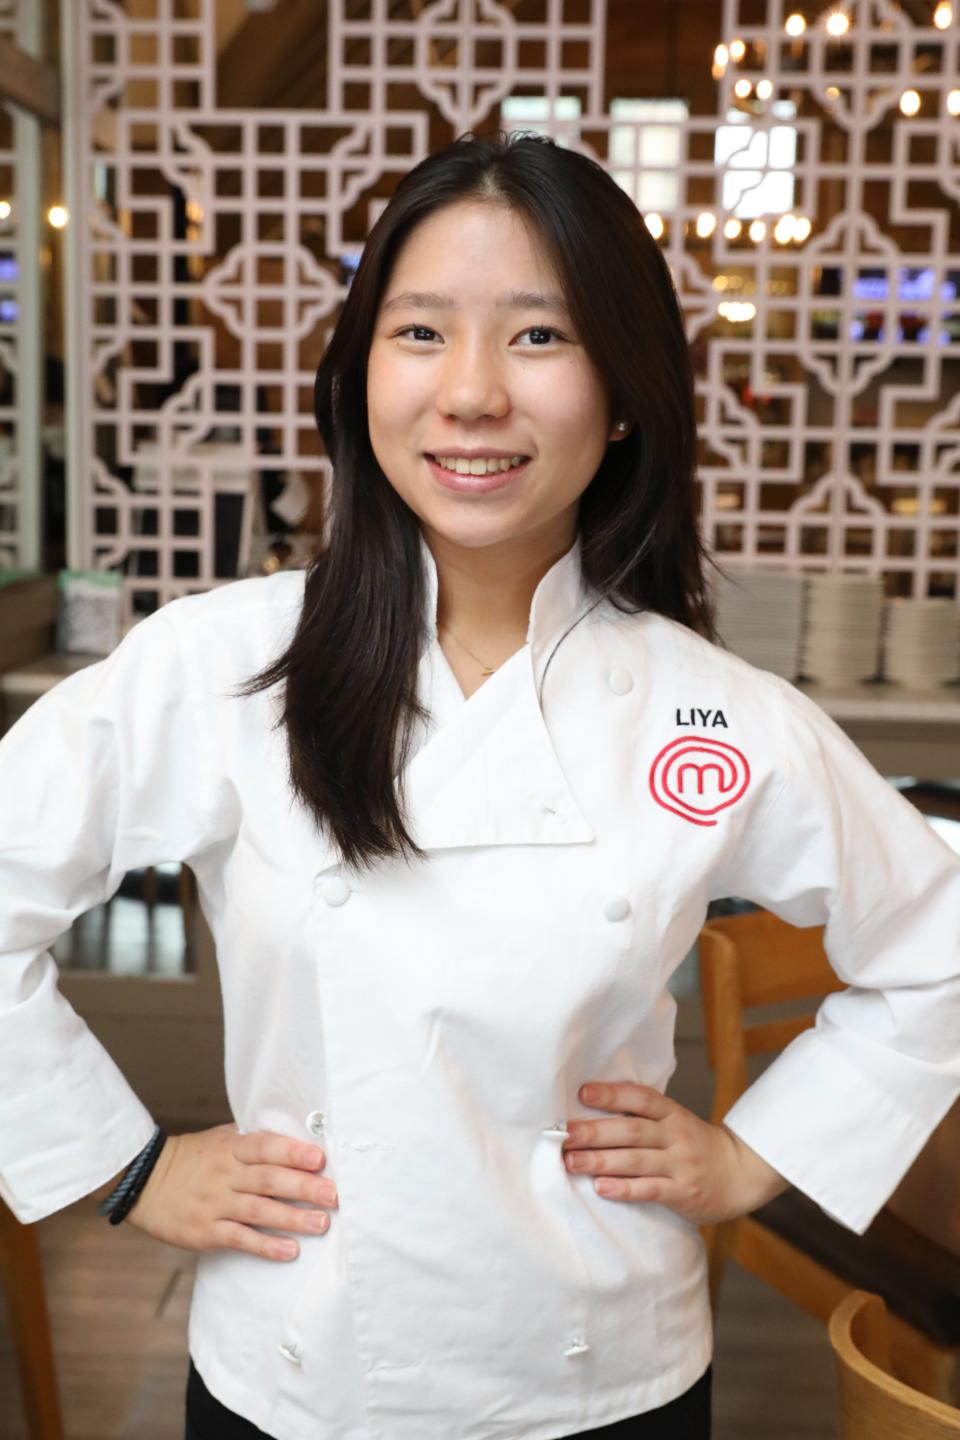 MasterChef Junior Liya Chu, 13, at her parents' restaurant Fantasy Cuisine in Hartsdale June 16, 2022. The Scarsdale resident was 10 when competing on the show which was delayed to air because of the pandemic. The family also owns Dumpling + Noodle in Bronxville.